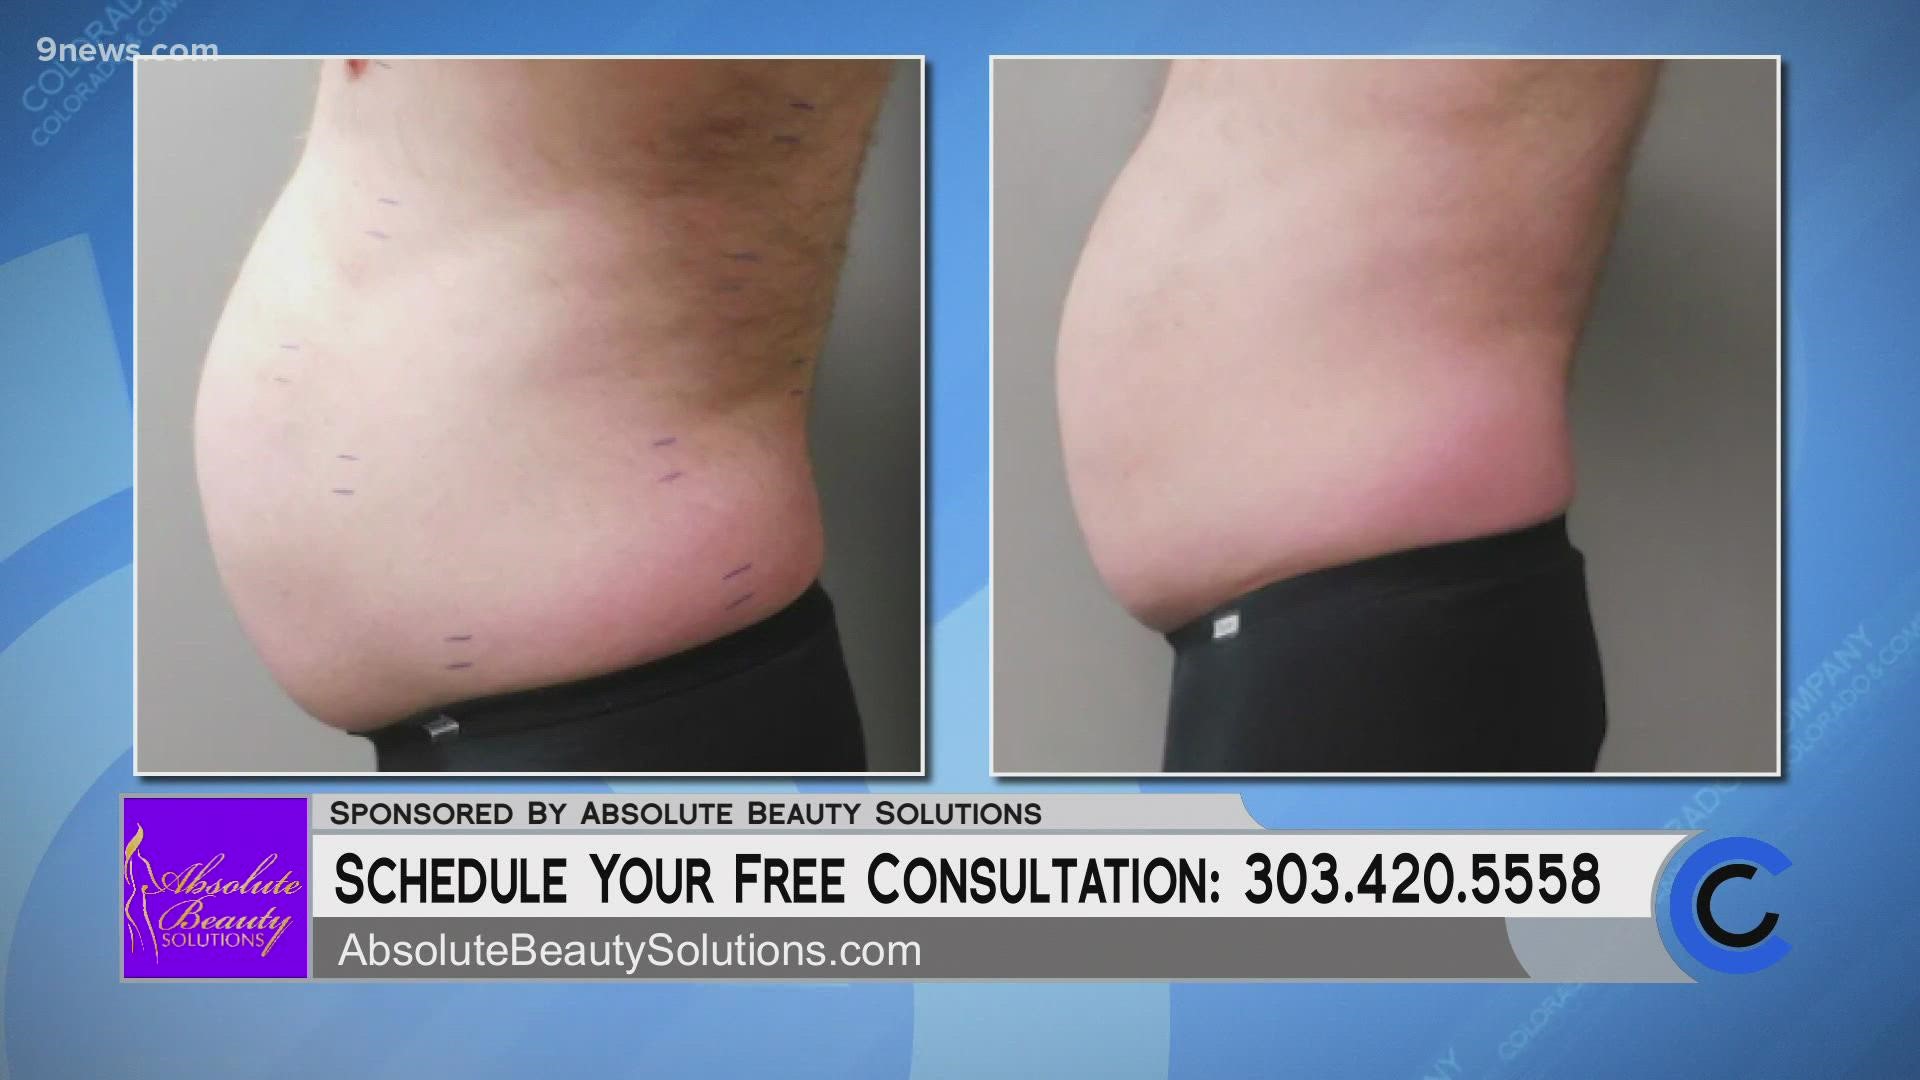 Lose two inches with ultra slim during your first visit or its free! Visit AbsoluteBeautySolutions.com or call 303.420.5558 to get started. **PAID CONTENT**